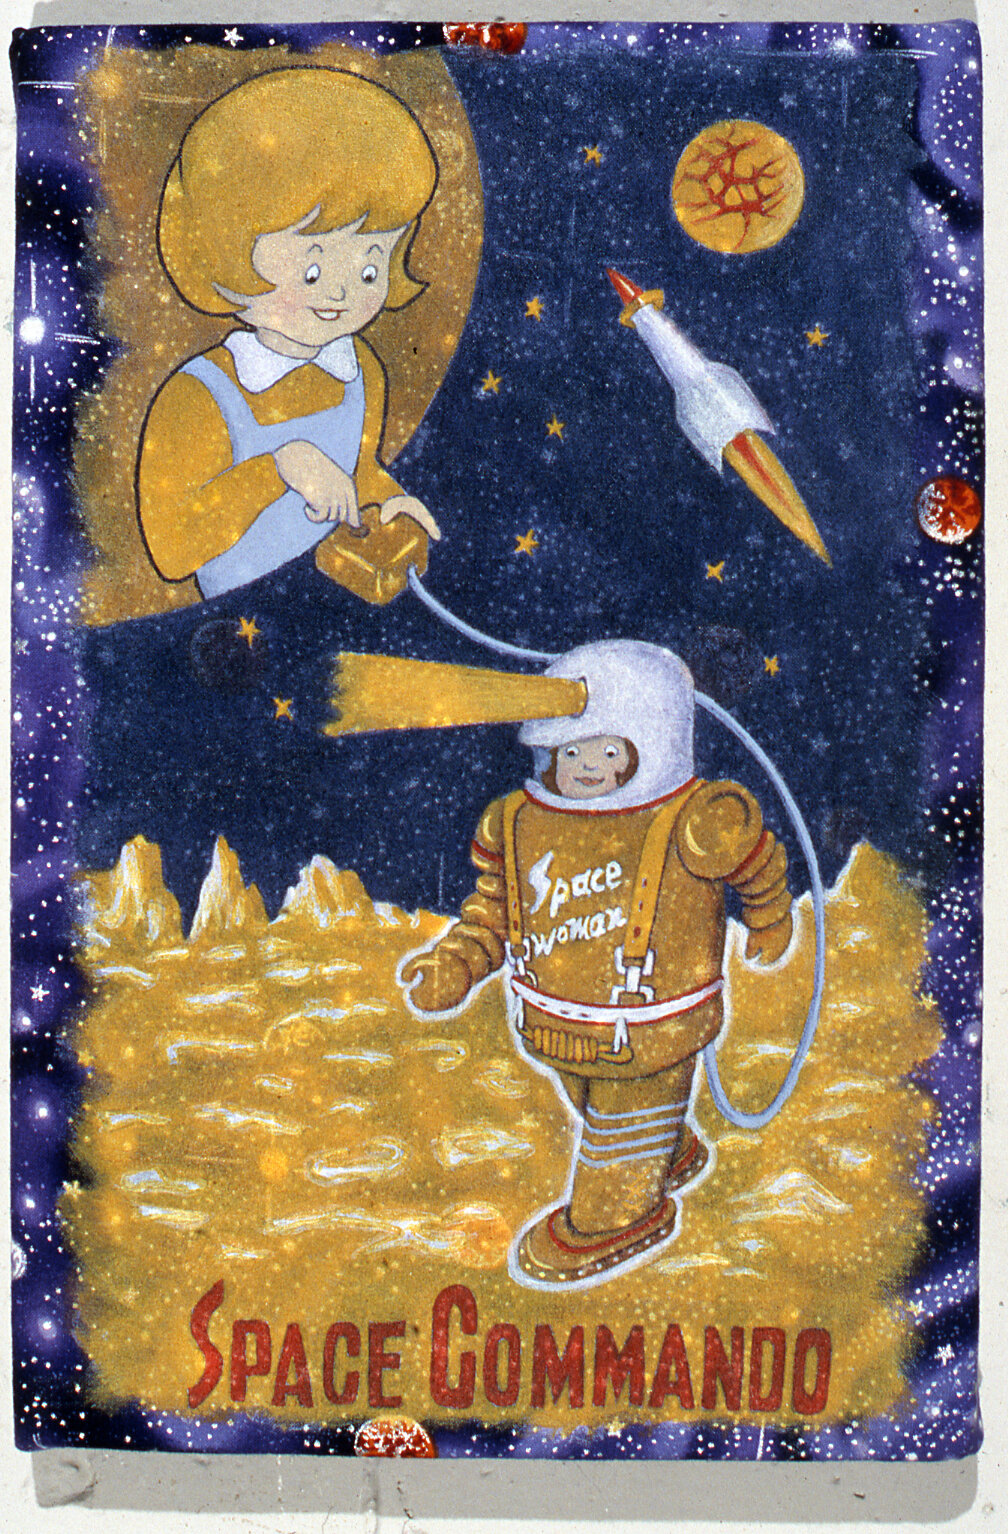   Space Commando   12”x8”  acrylic on commercially printed fabric  1995  PRIVATE COLLECTION 